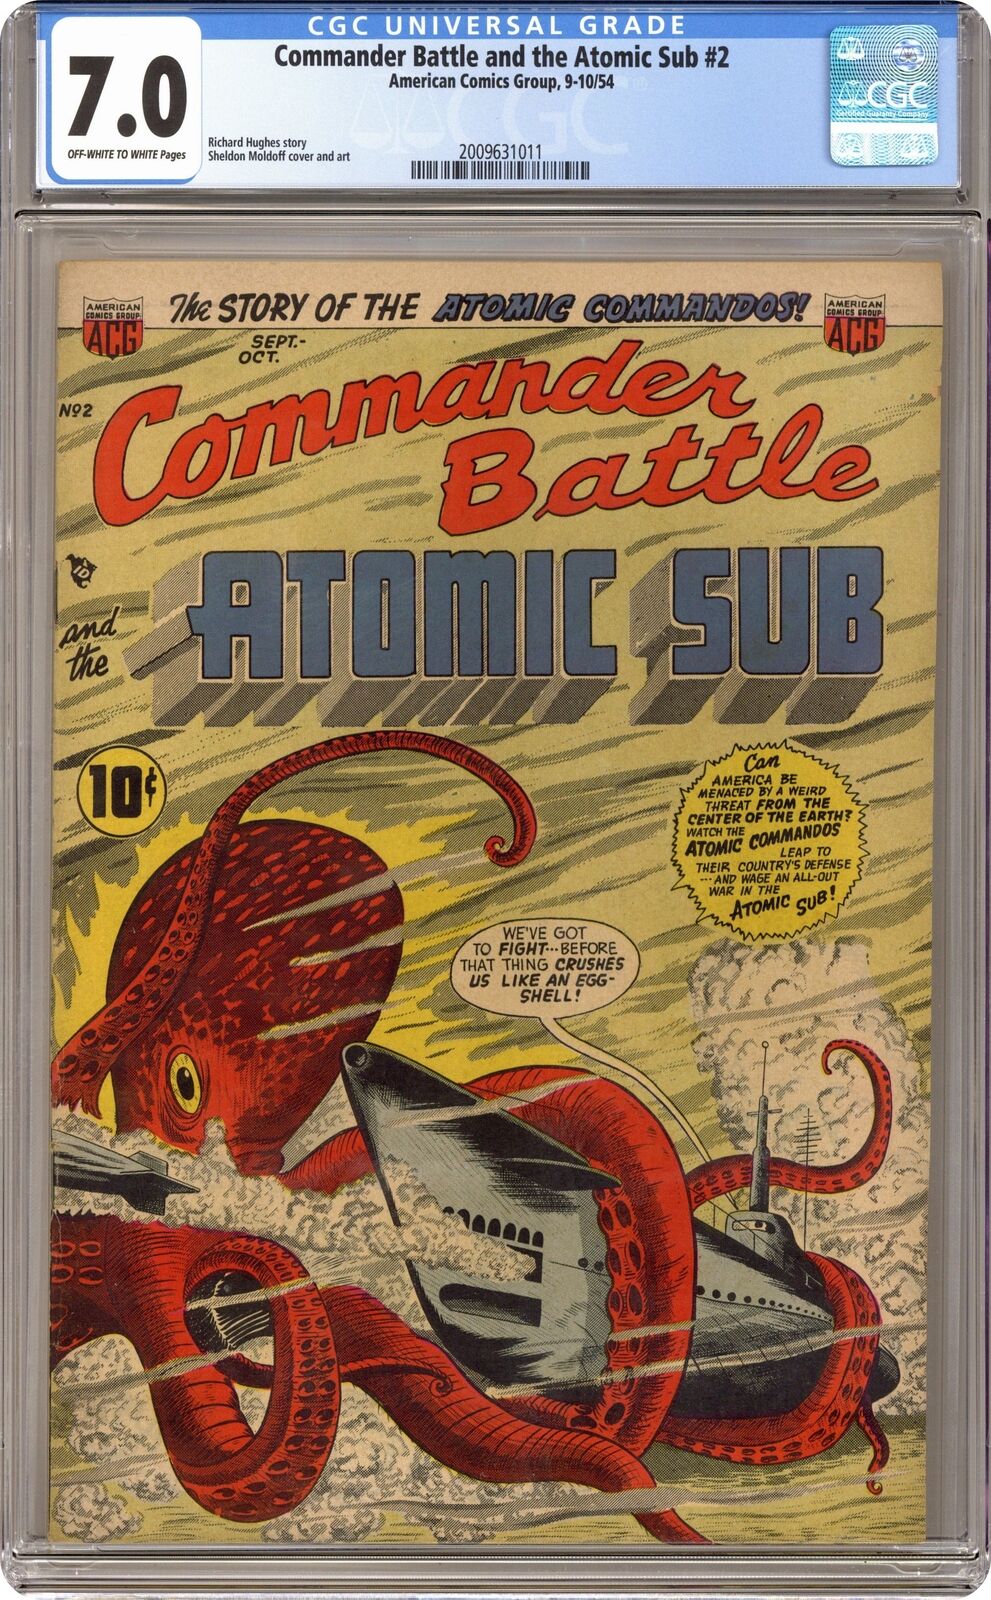 Commander Battle and the Atomic Sub #2 CGC 7.0 1954 2009631011